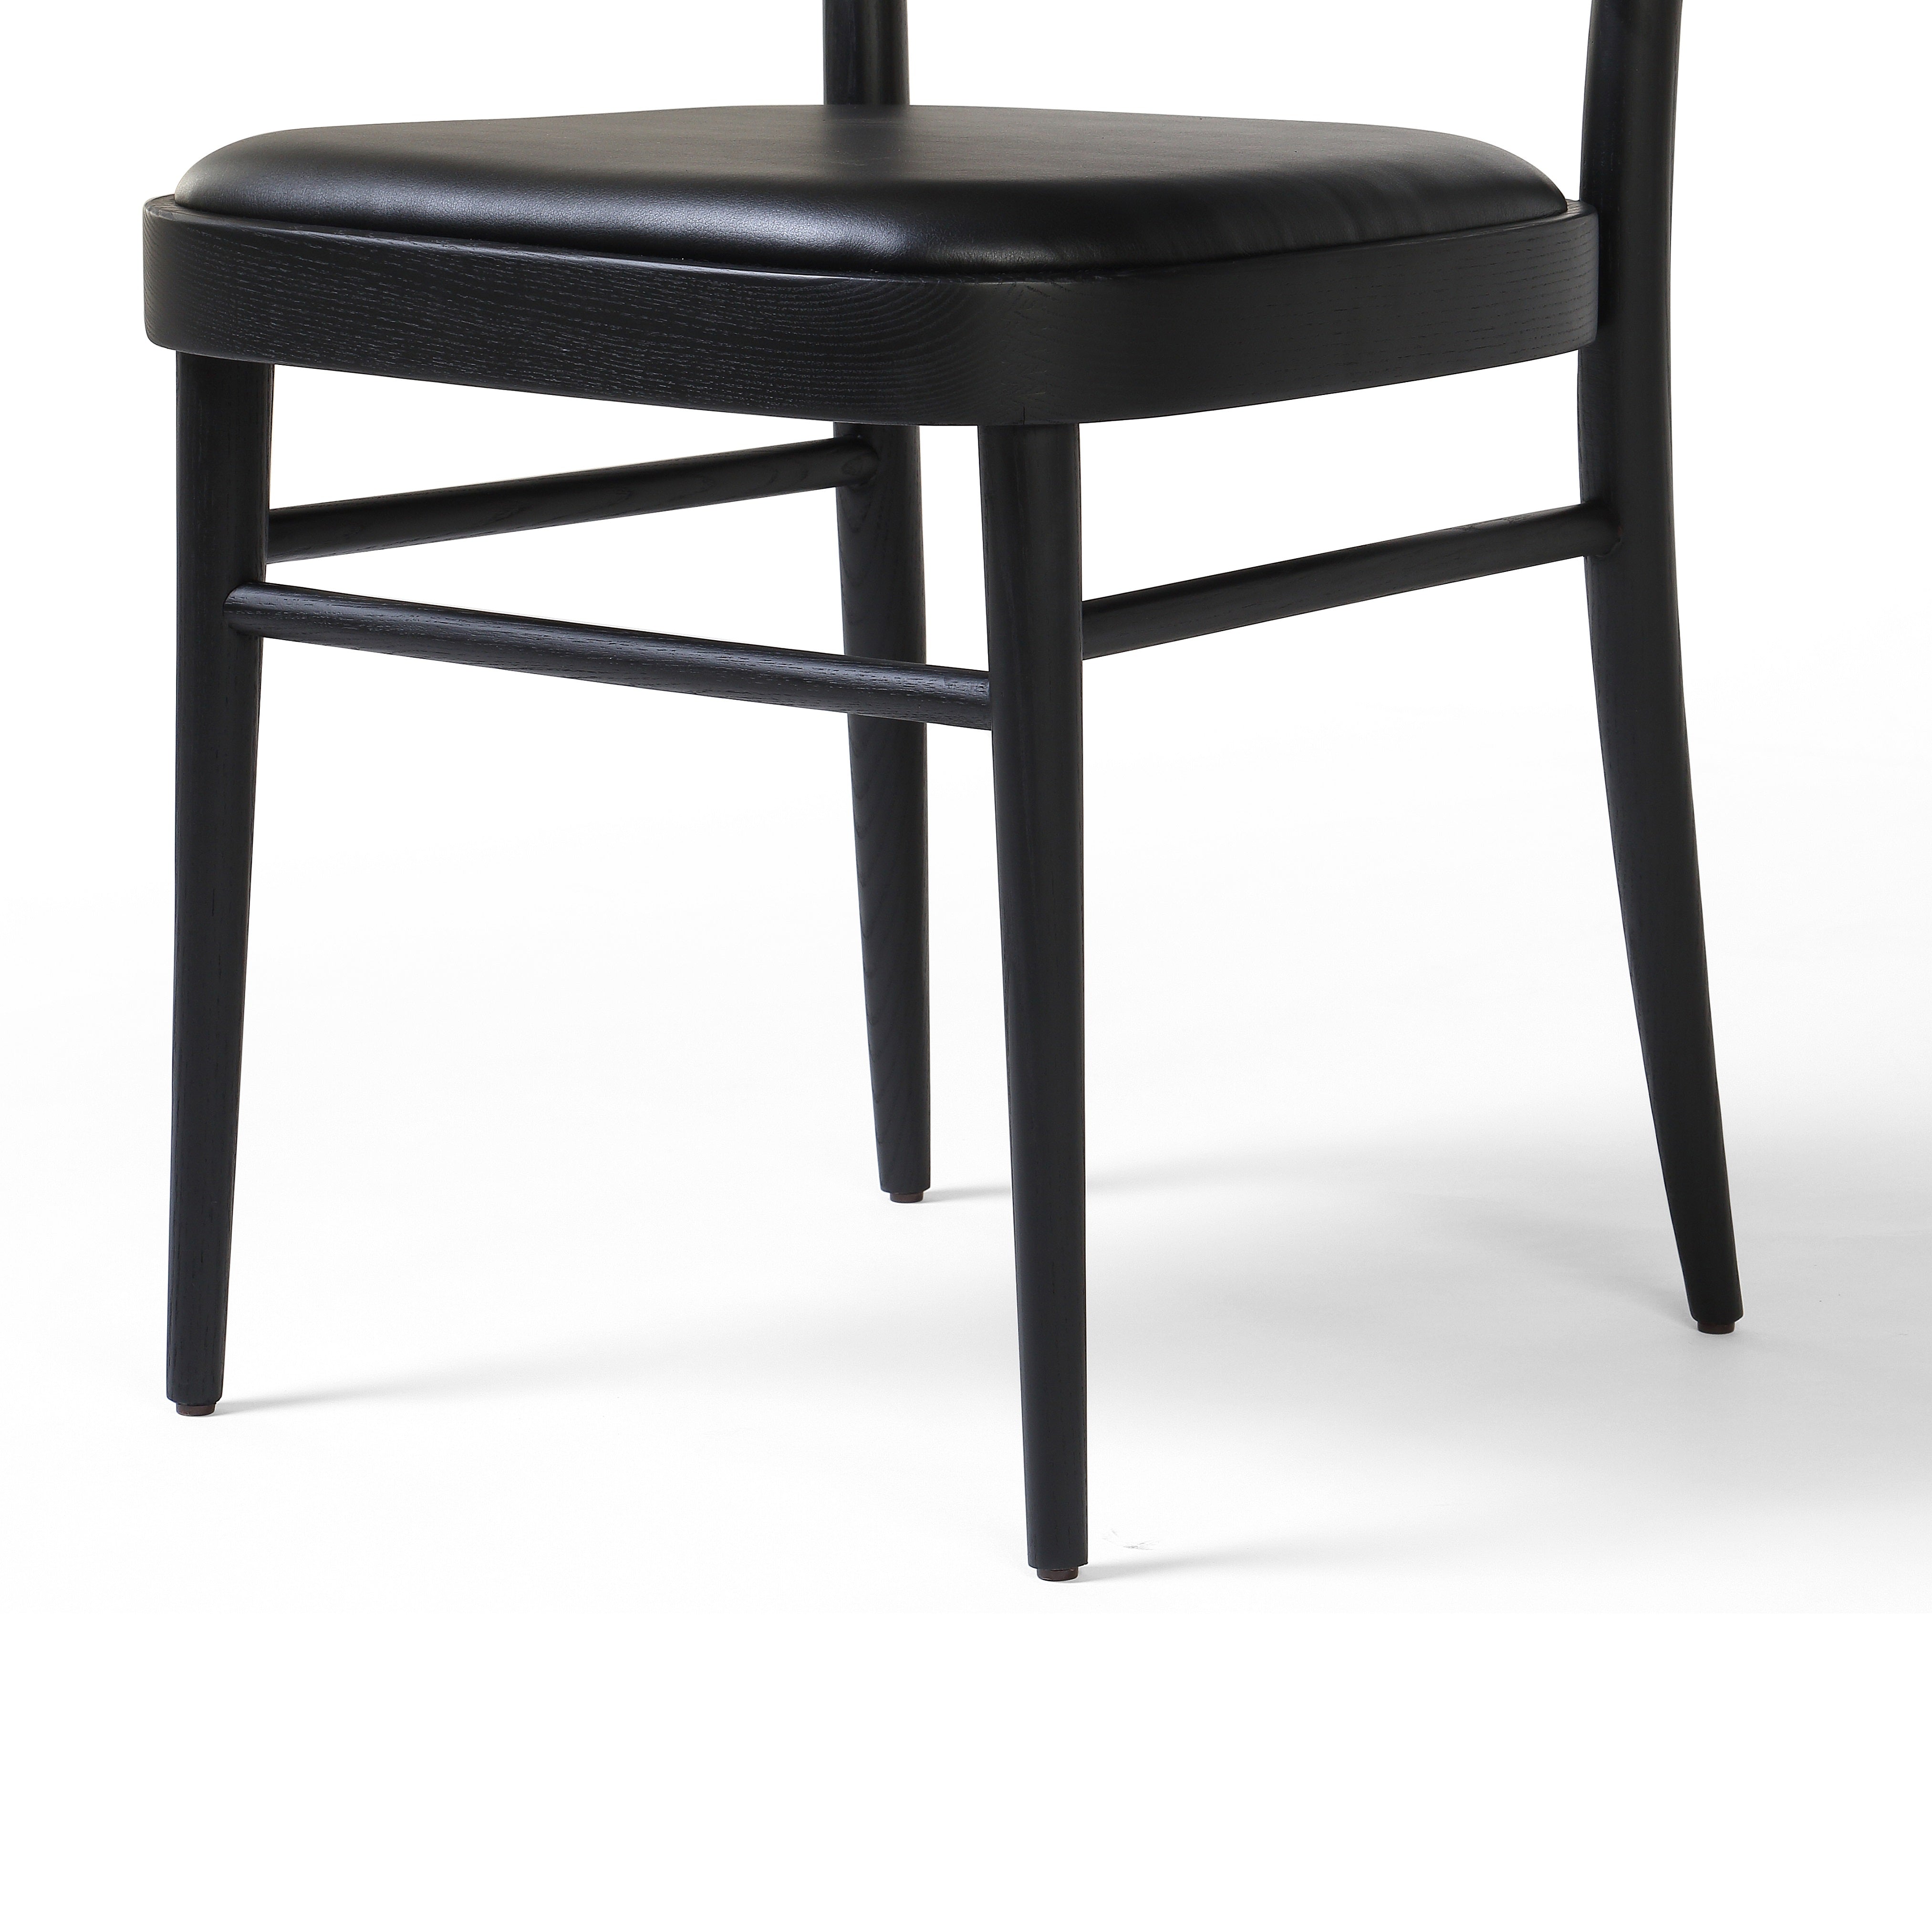 Inspired by the Thonet chair popularized in the mid-century, the Court Black Ash Dining Chair forms a simple but-shapely frame for black seating and a natural cane back. Amethyst Home provides interior design services, furniture, rugs, and lighting in the Seattle metro area.